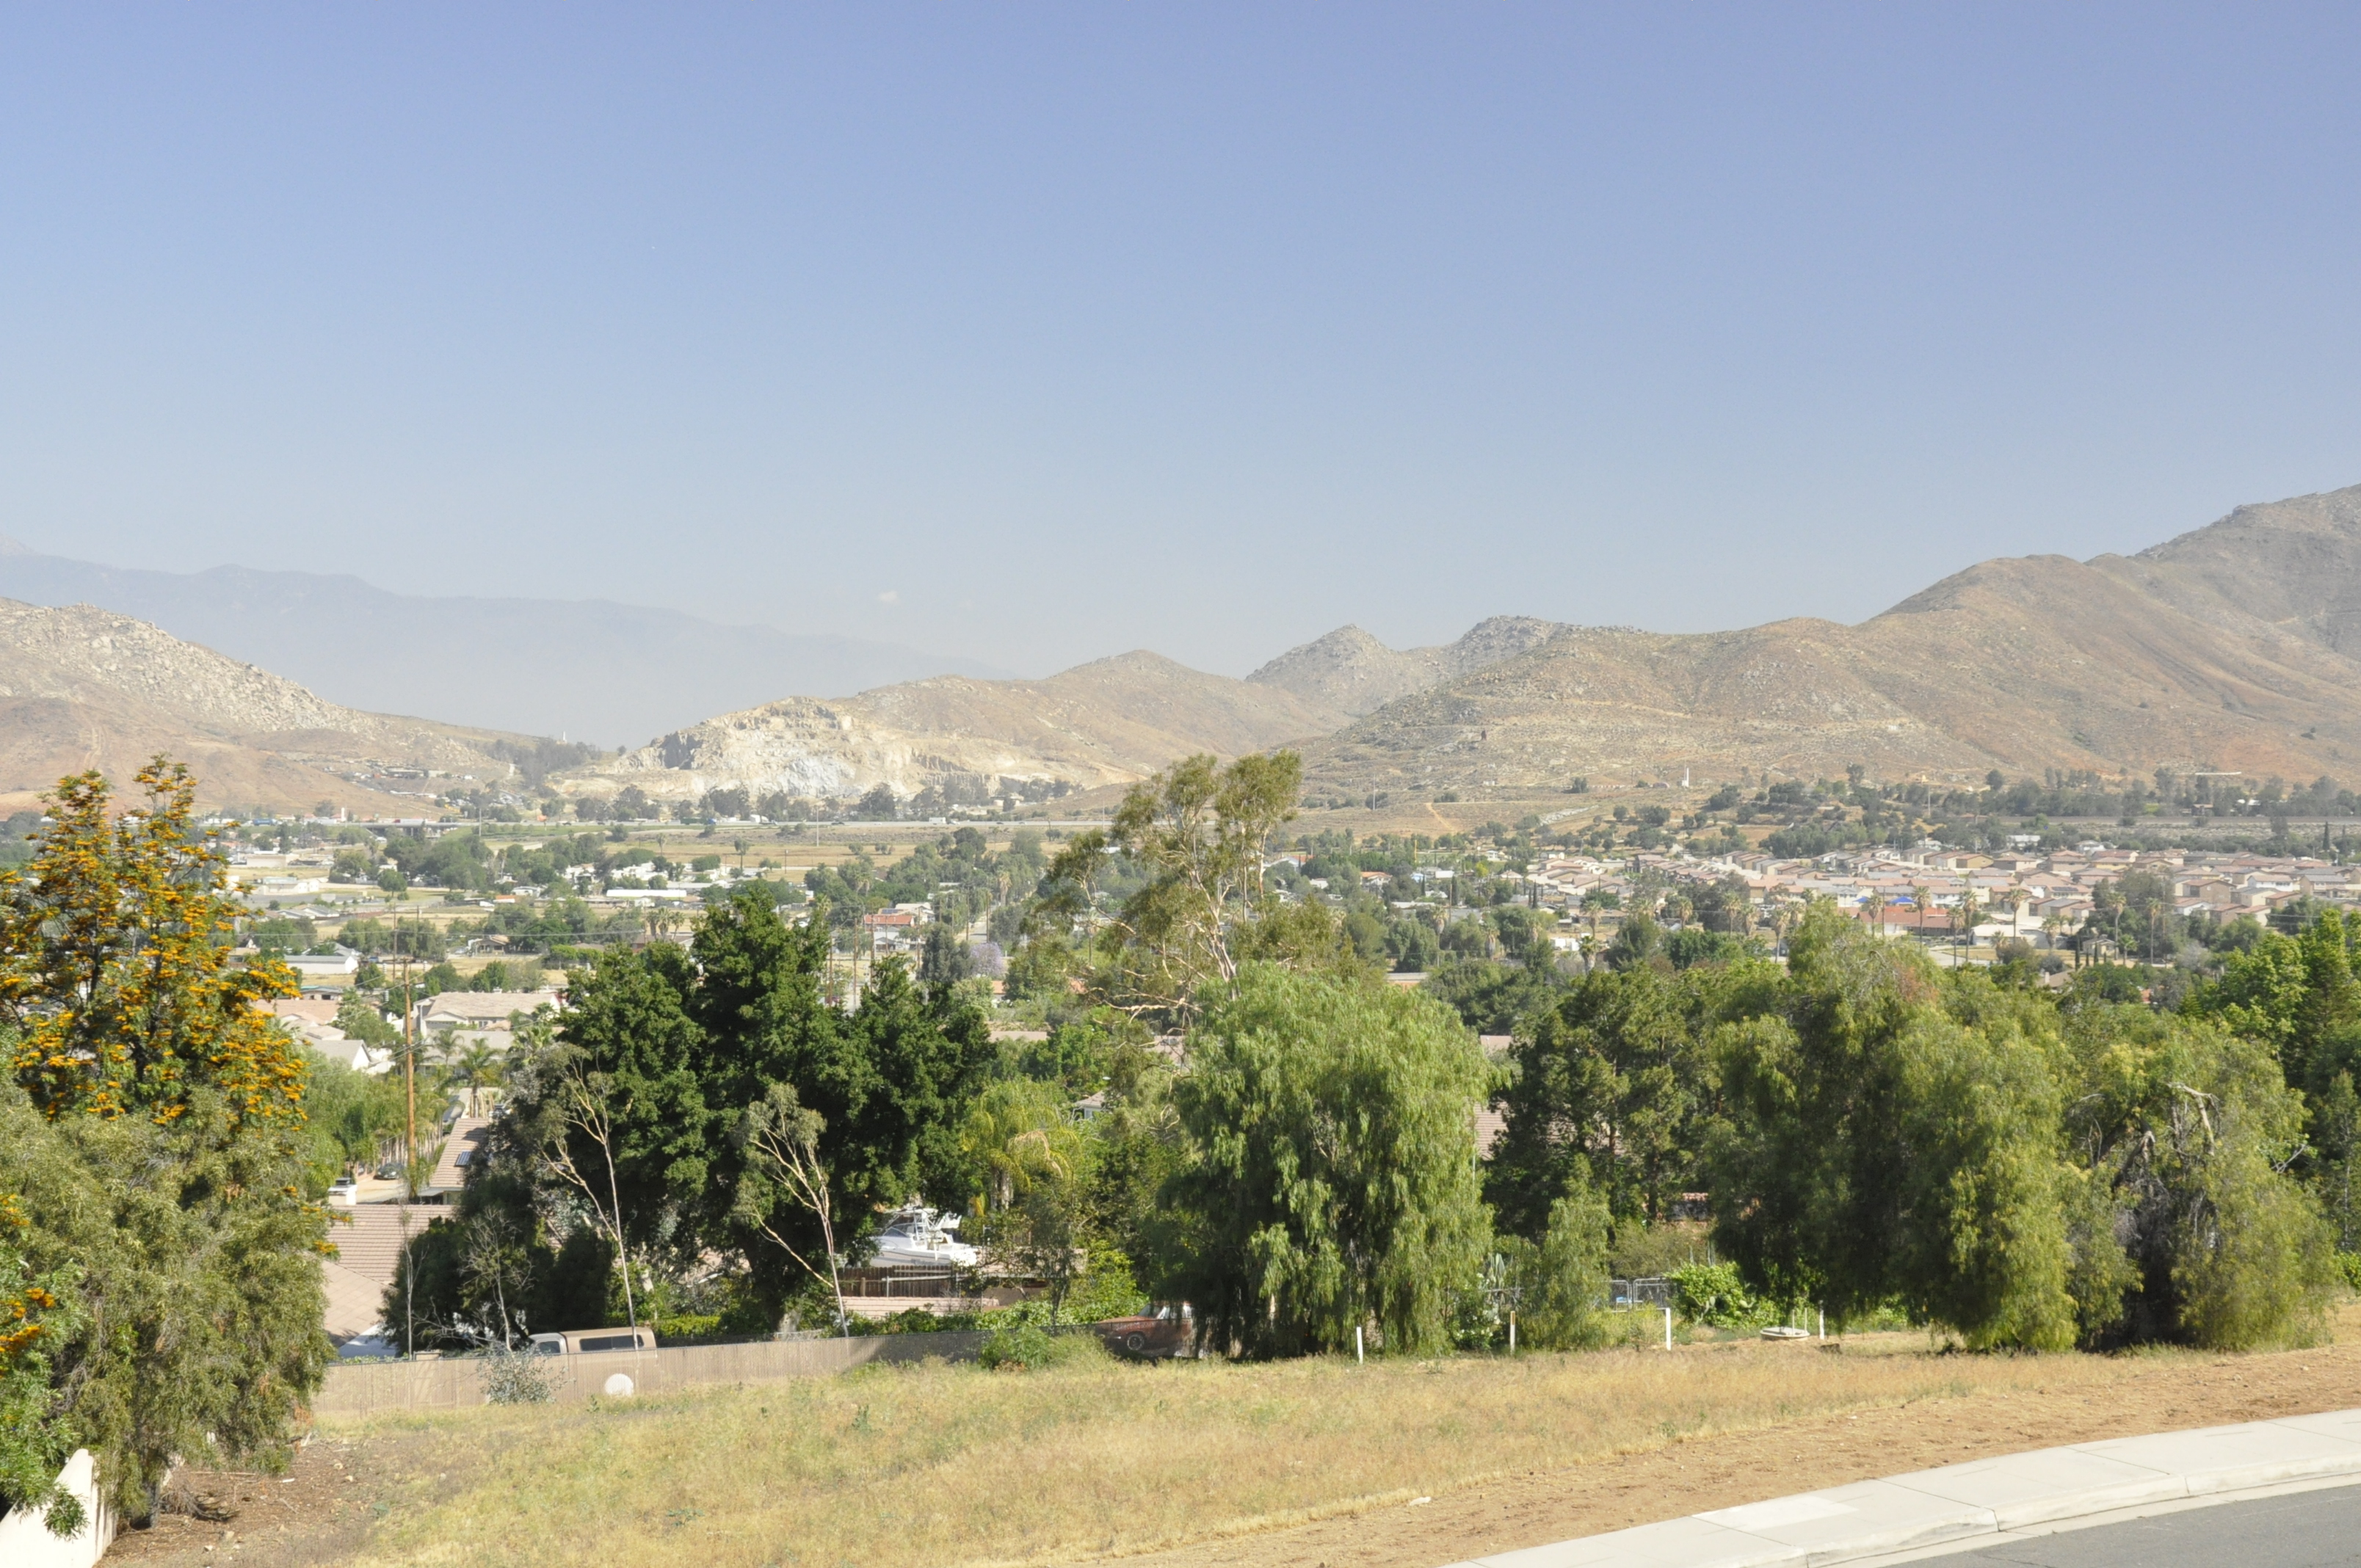 Trees and urban areas in Jurupa Valley